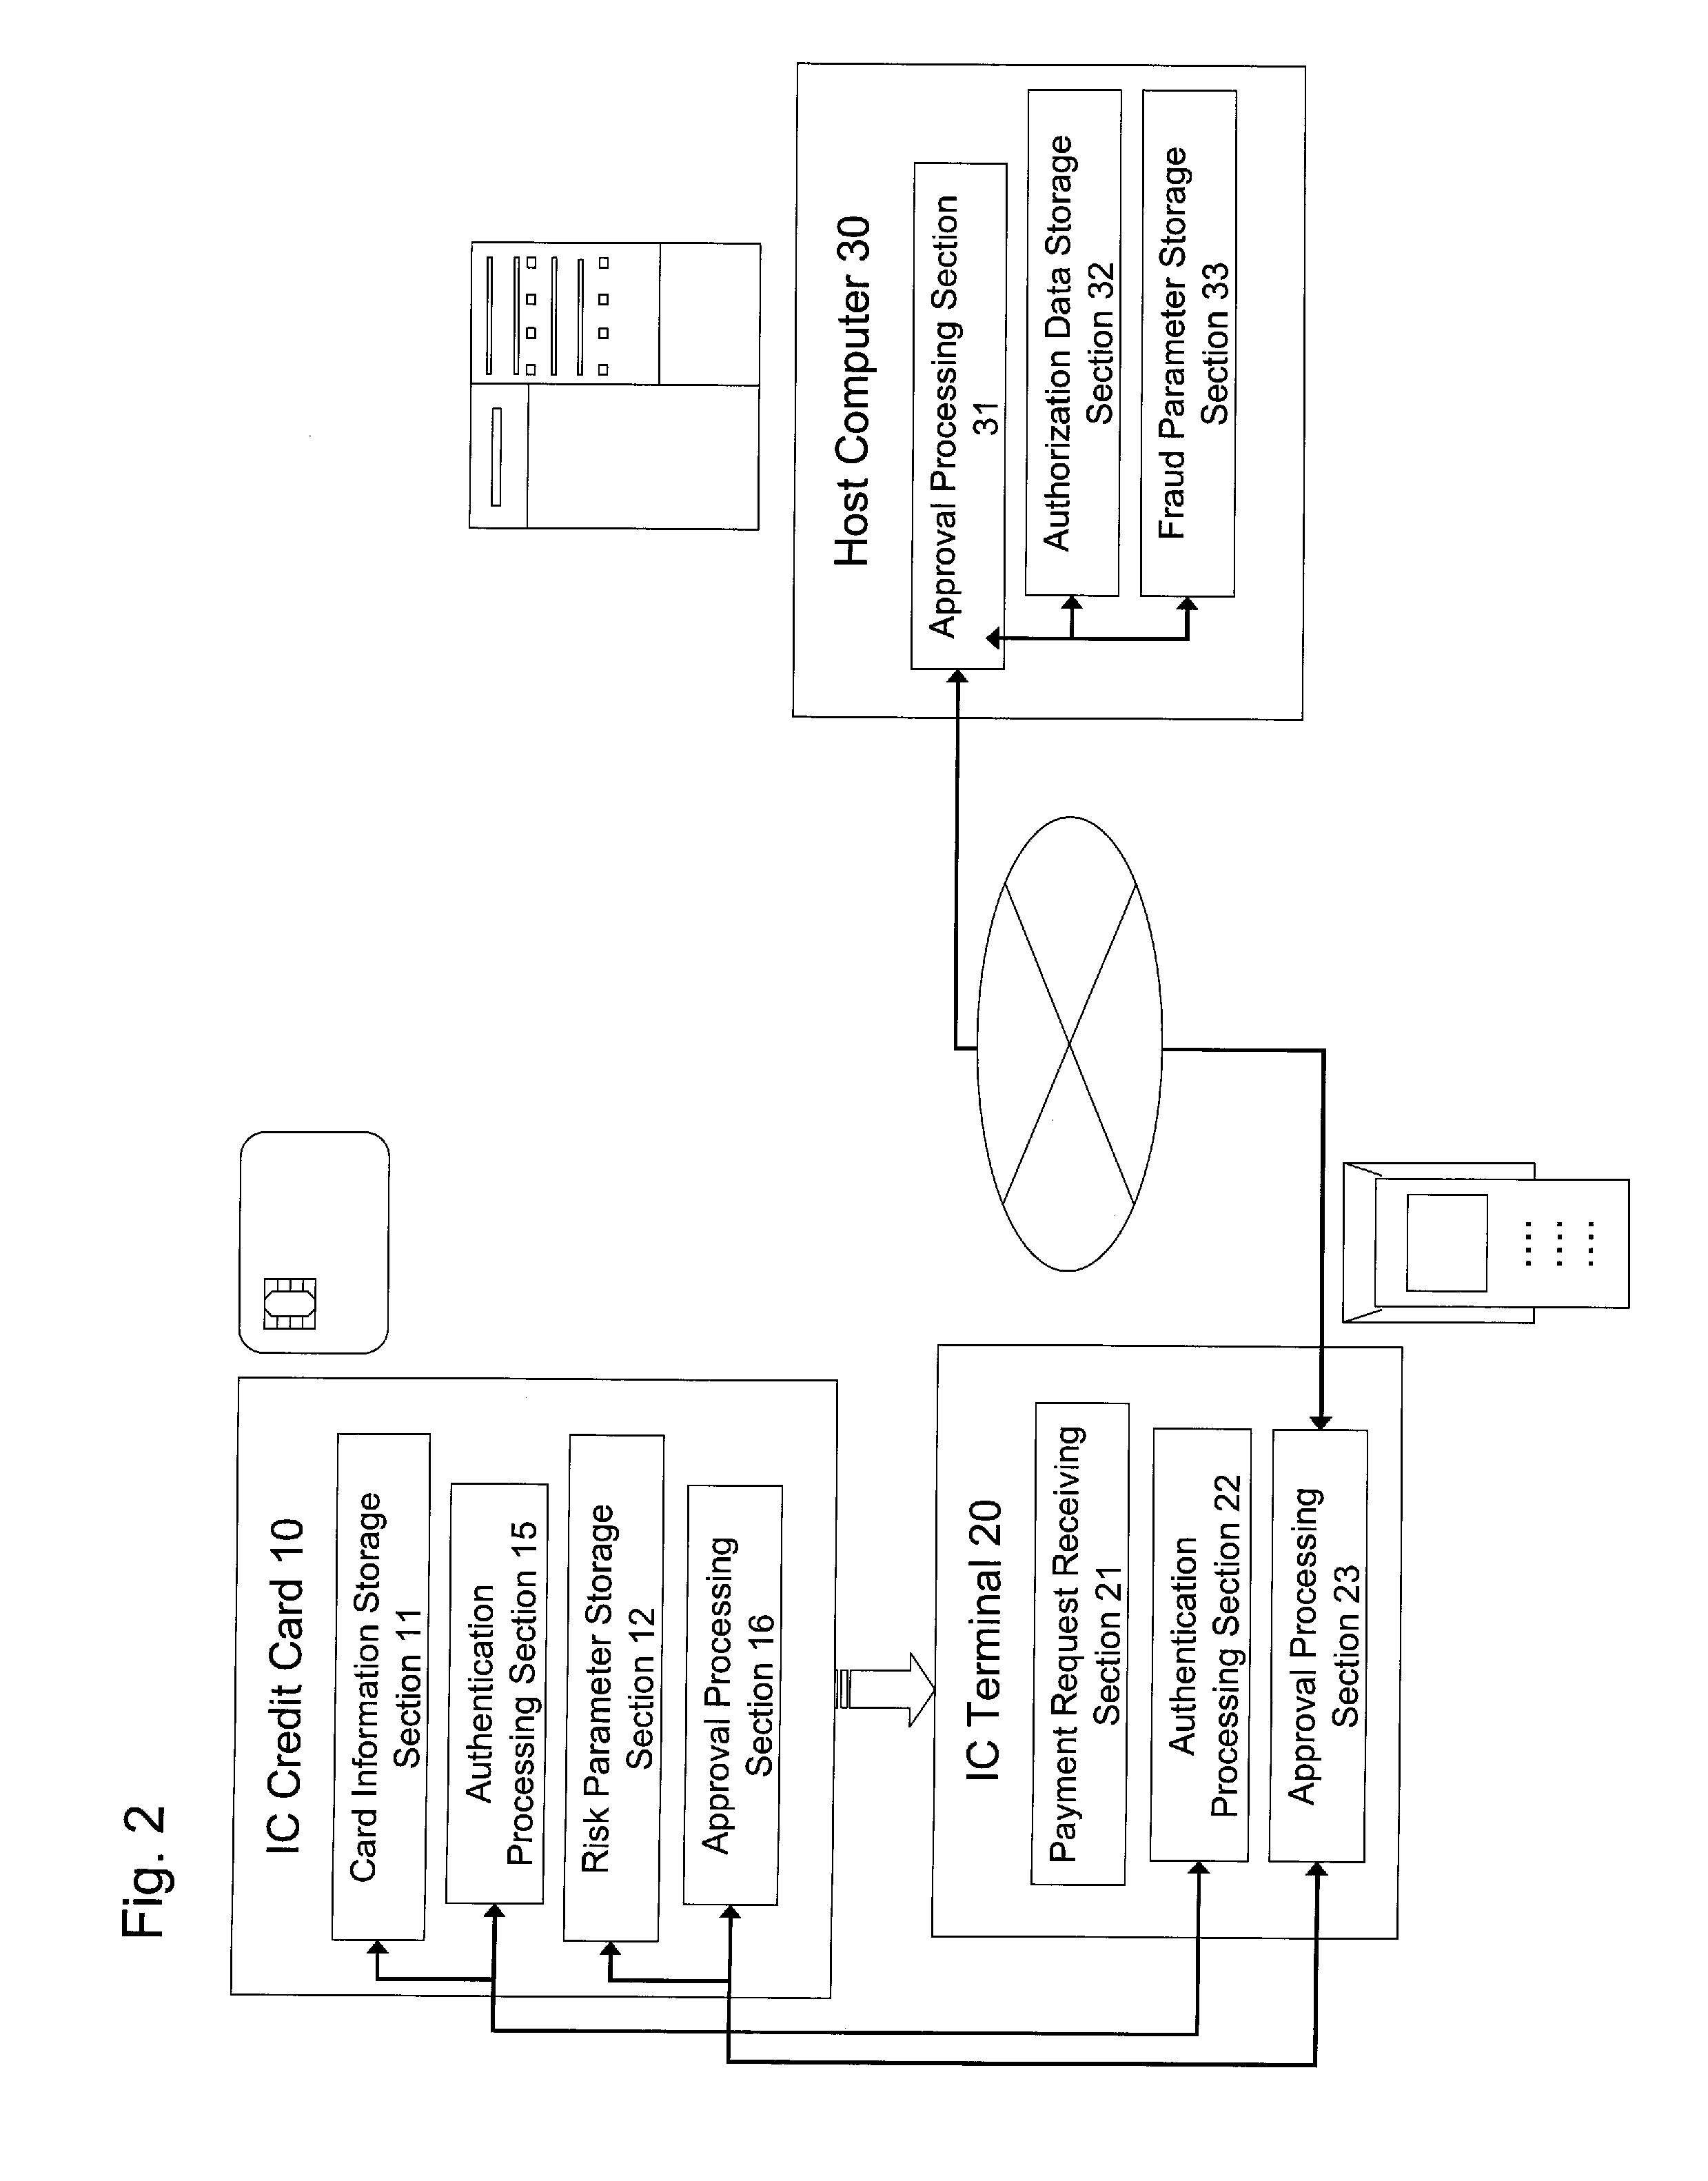 Payment approval system and method for approving payment for credit card